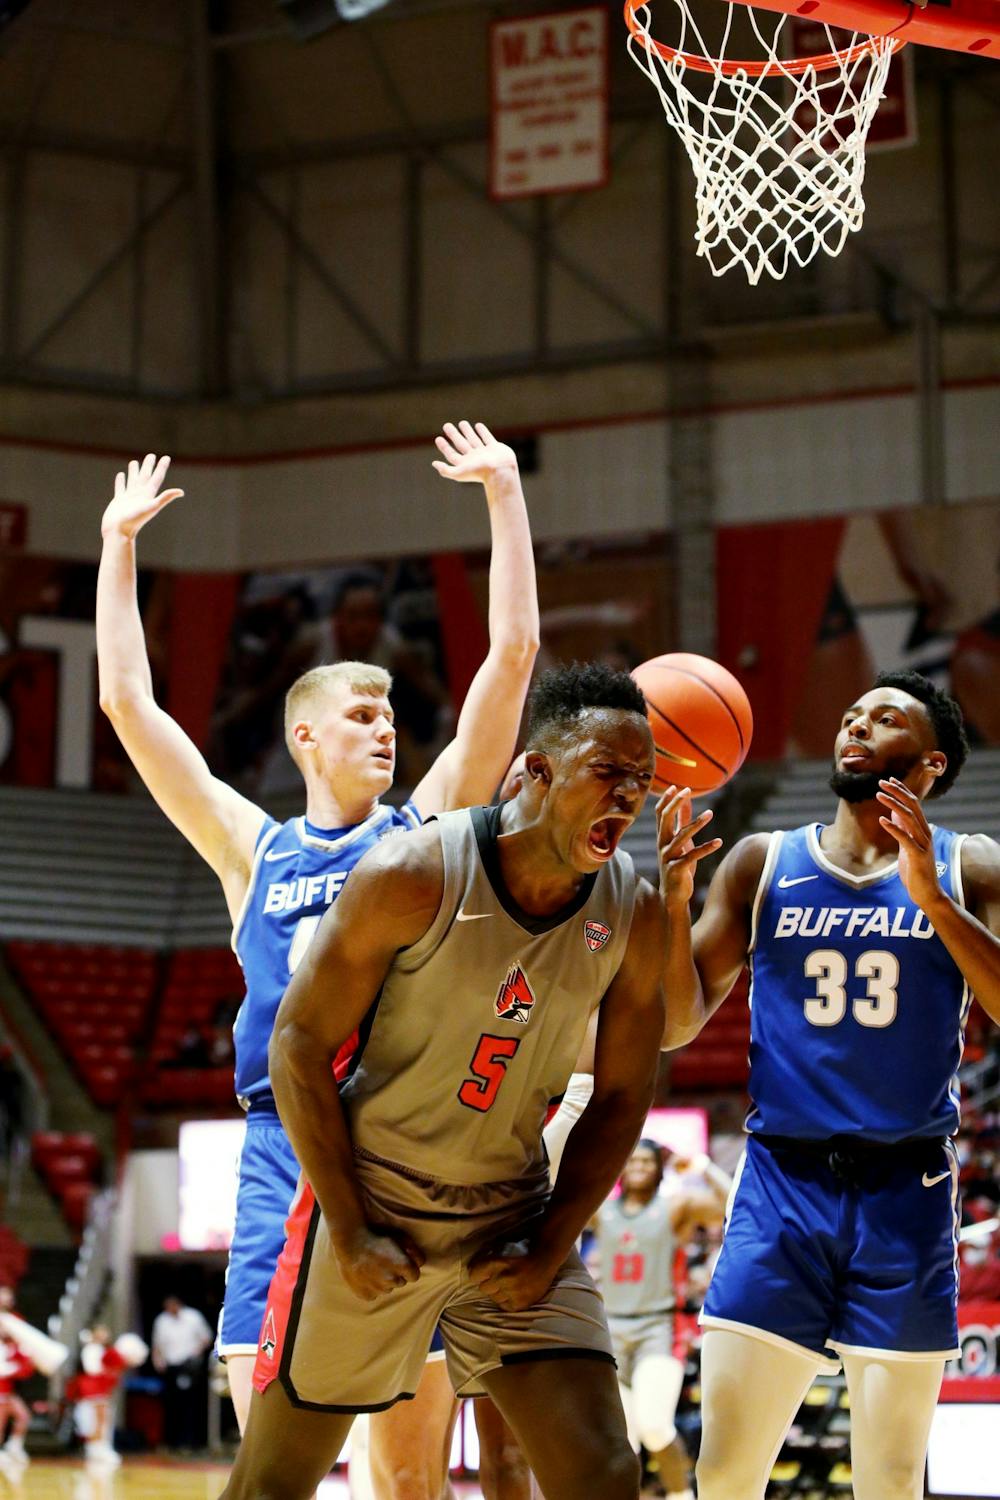 The gentle giant: Payton Sparks flips the switch for Ball State Men’s Basketball but doesn't forget his roots